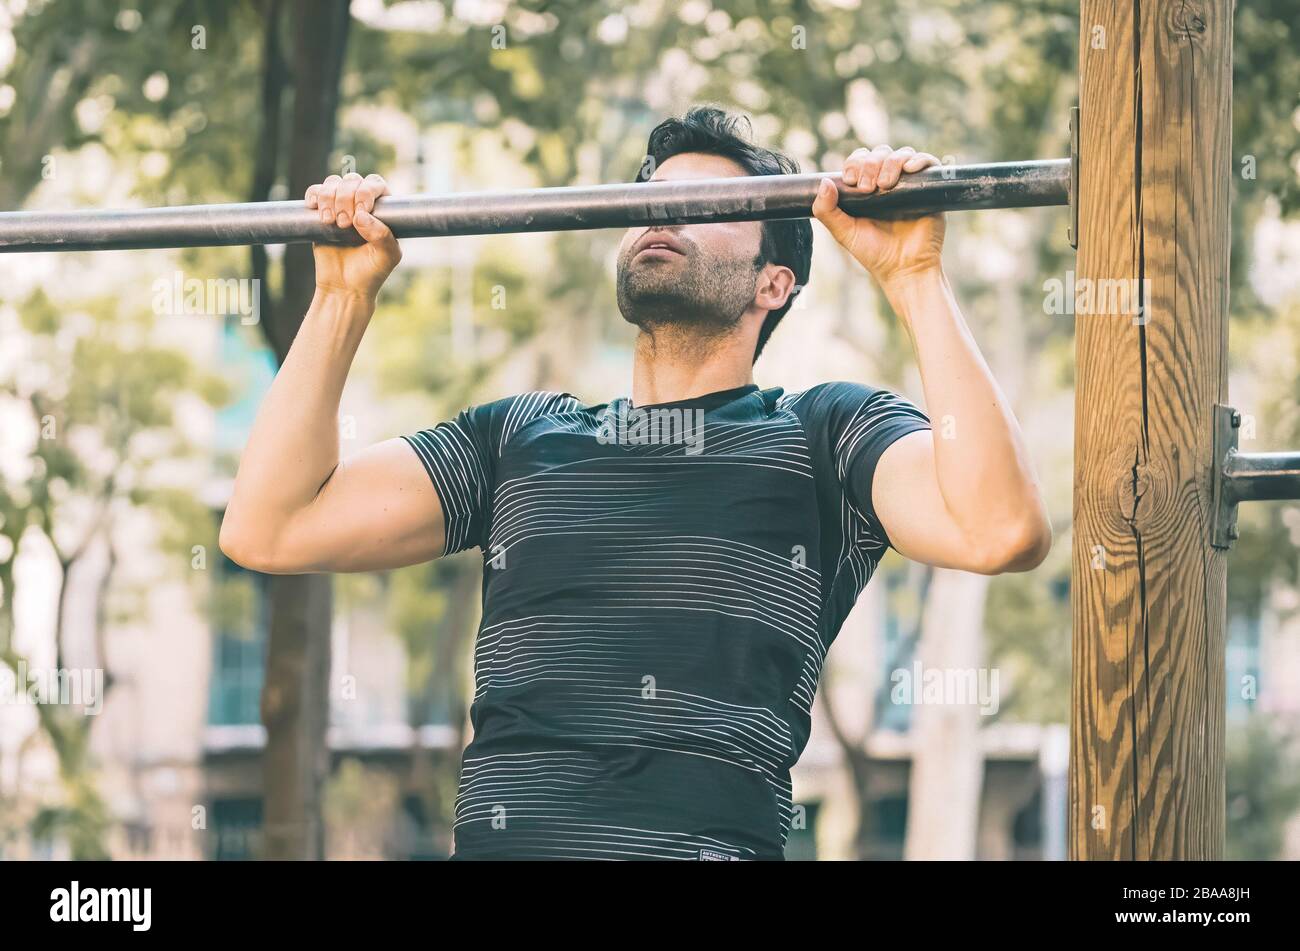 Young man making pull-up strength training exercise - fitness guy working out his arm muscles on outdoor park gym doing chin-ups / pull-ups CrossFit Stock Photo